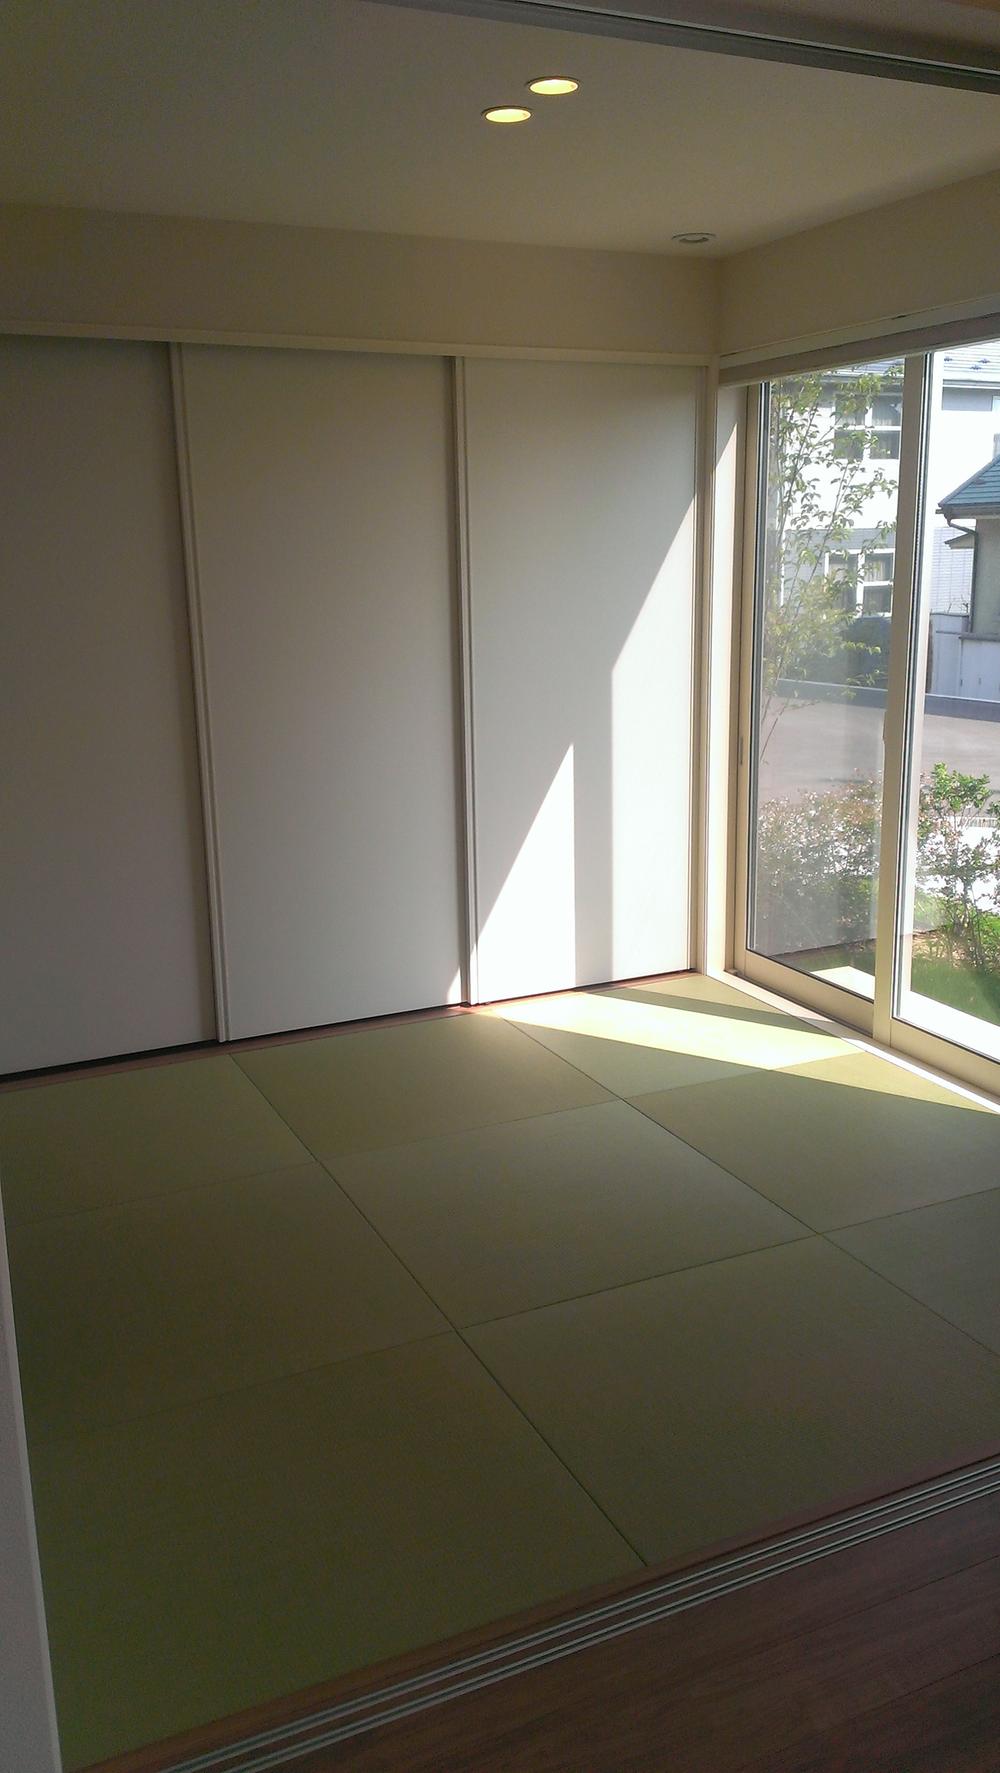 Non-living room. Living there is next to 4.5 Pledge of tatami rooms and of 1.5 quires storage